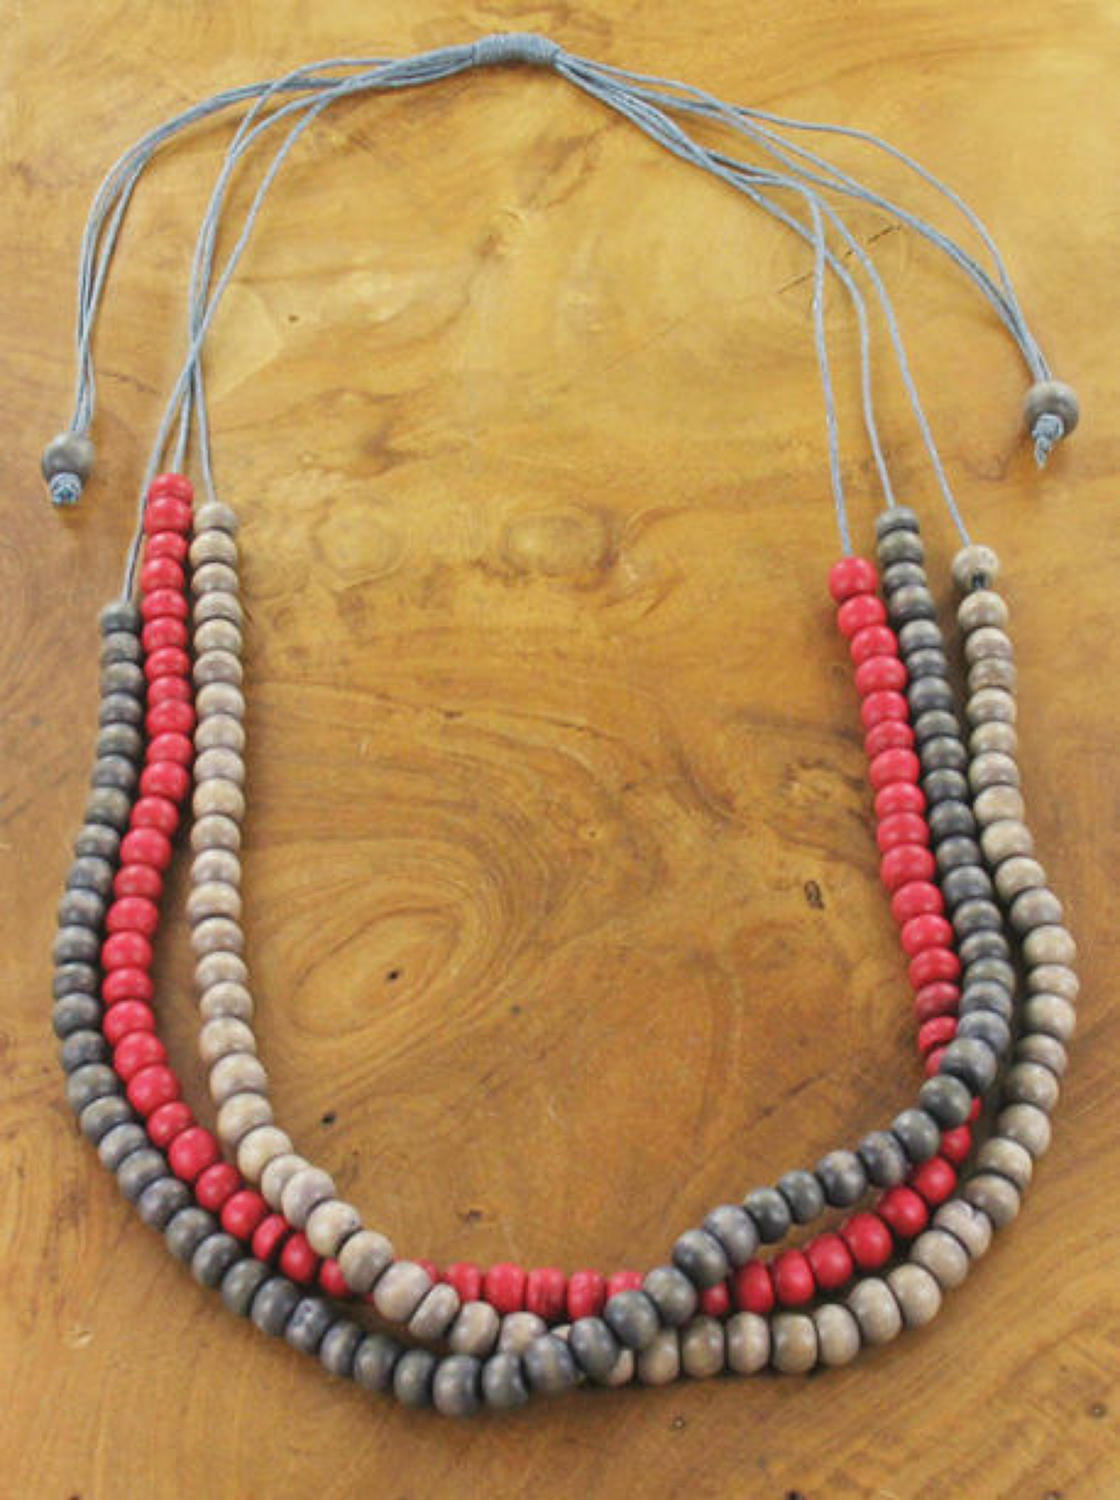 SB - Triple strand wooden necklace - Red / grey mix